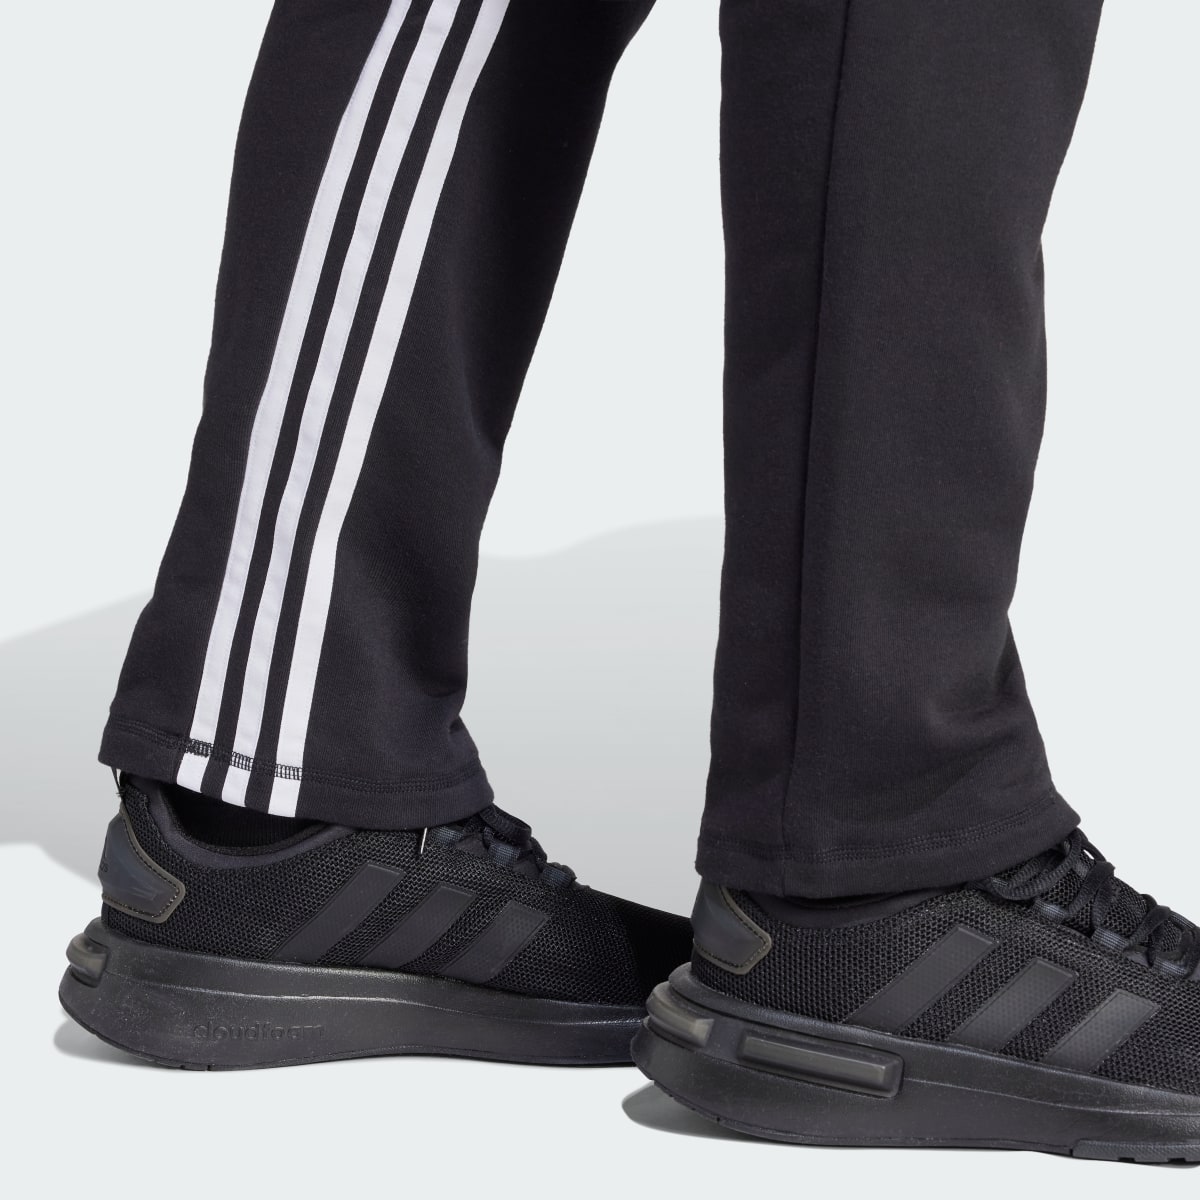 Adidas Express All-Gender Anti-Microbial Joggers. 6